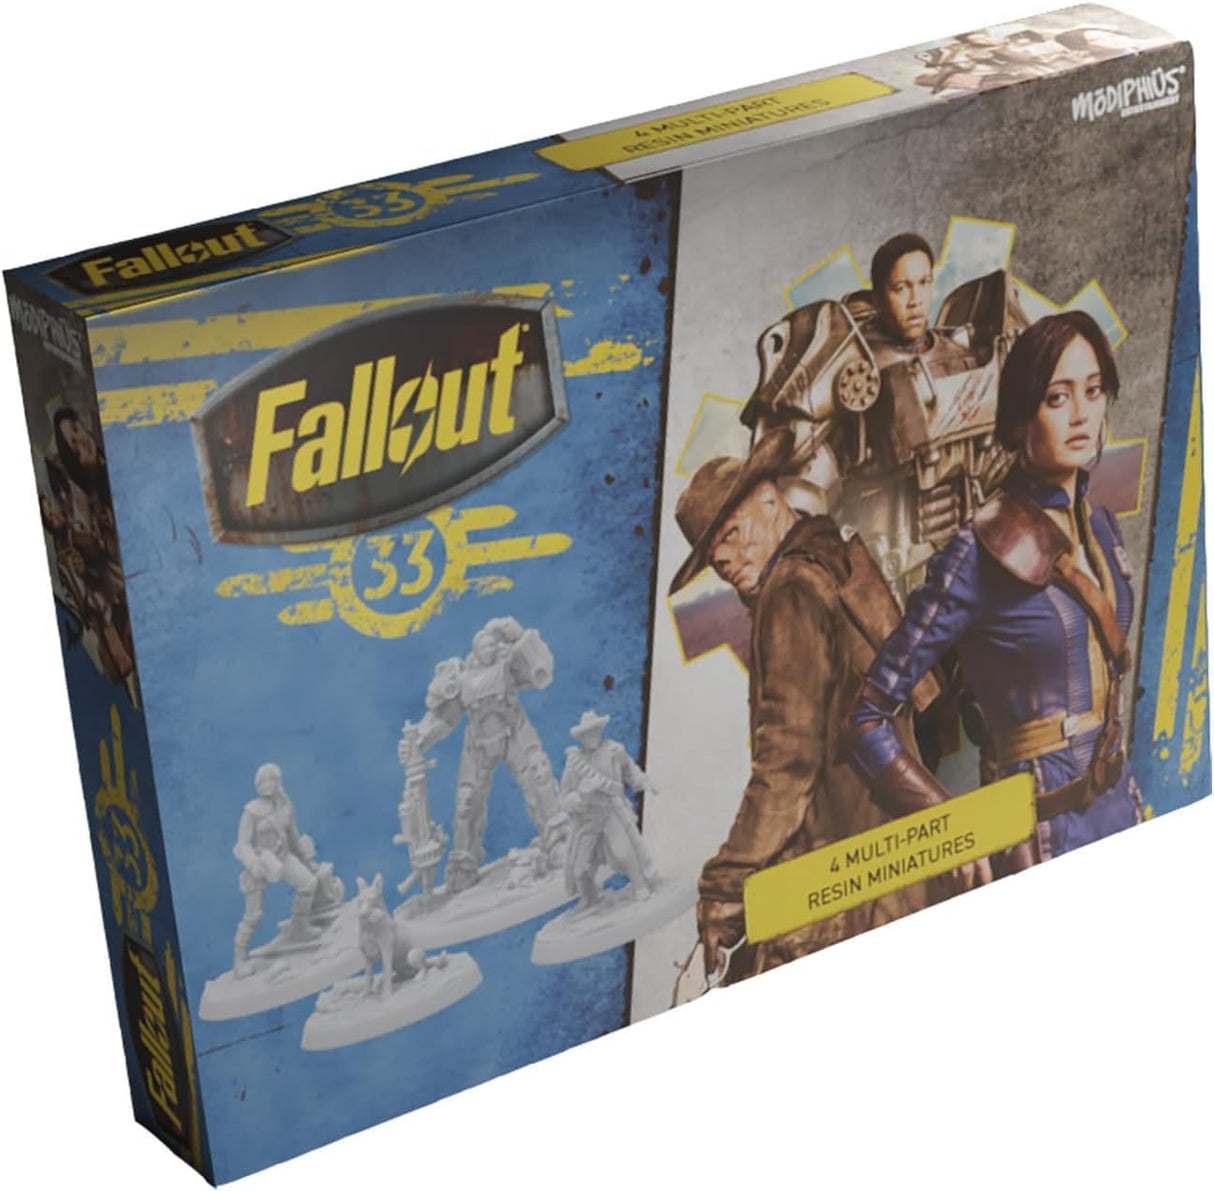 Fallout | Miniatures | Hollywood Heroes (Amazon TV Show Tie-In)